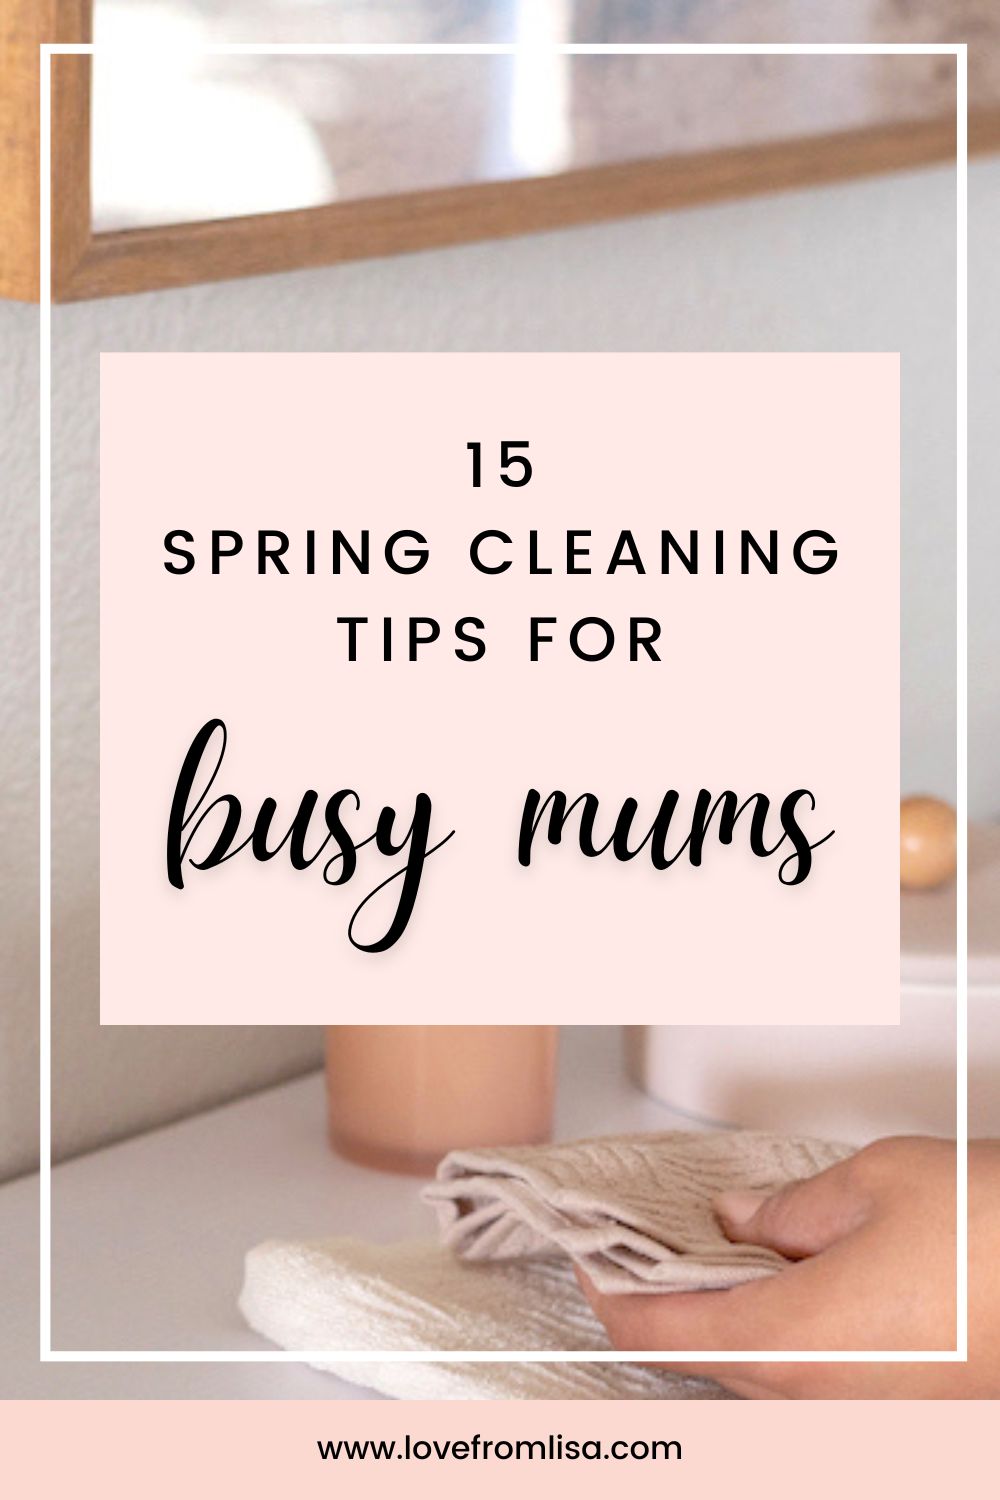 15 spring cleaning tips for busy mums Pinterest graphic